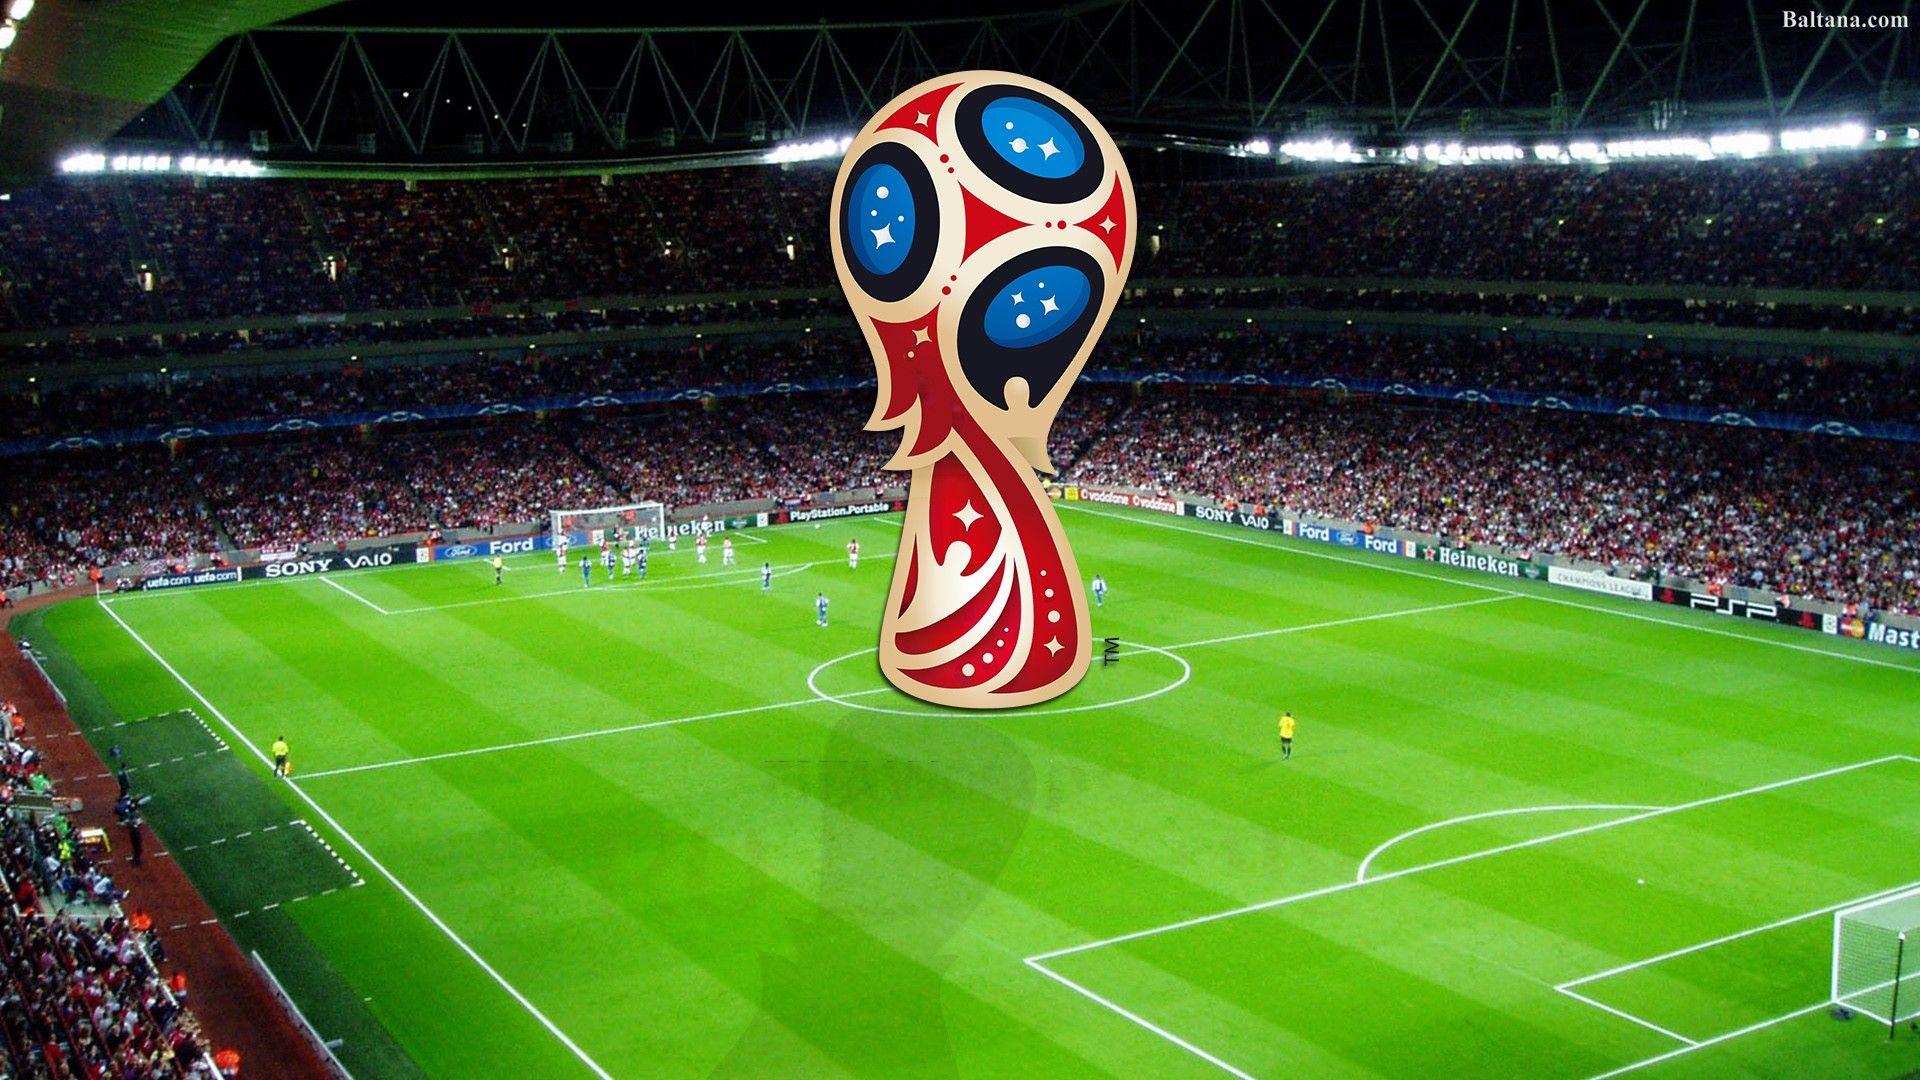 FIFA World Cup 2018 Wallpapers - Wallpaper Cave